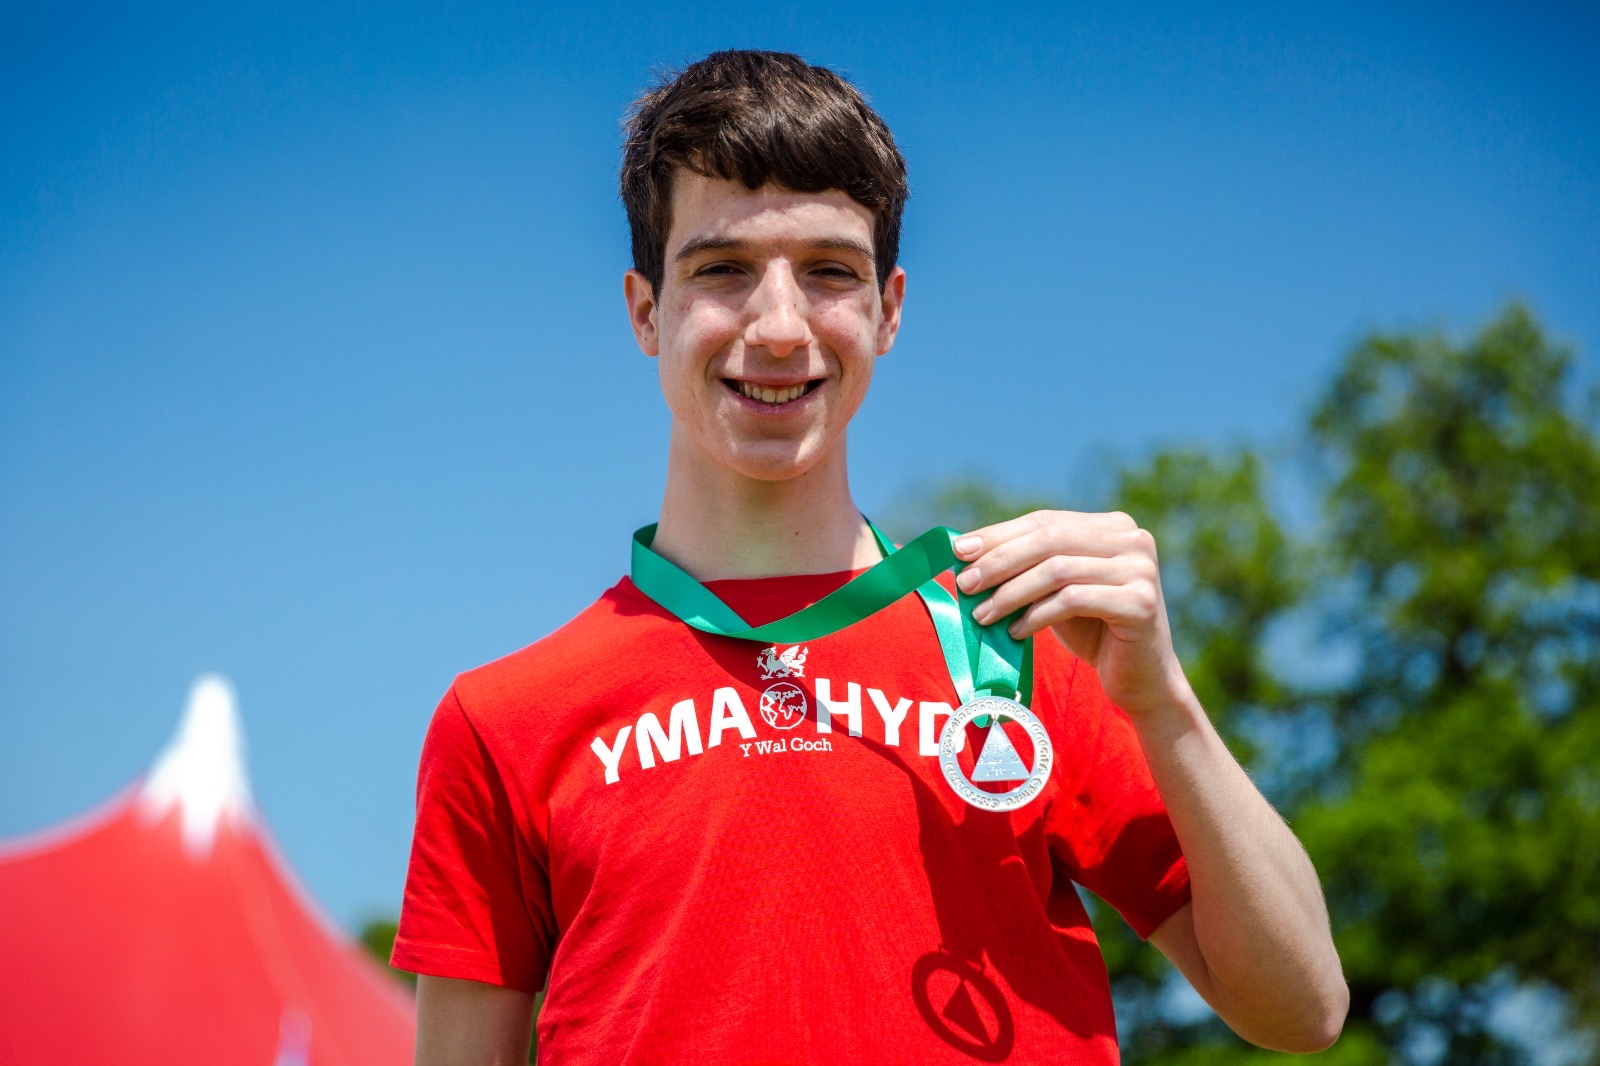 Gwilym Morgan was the winner of the 2023 Learners Medal at the Urdd Eisteddfod